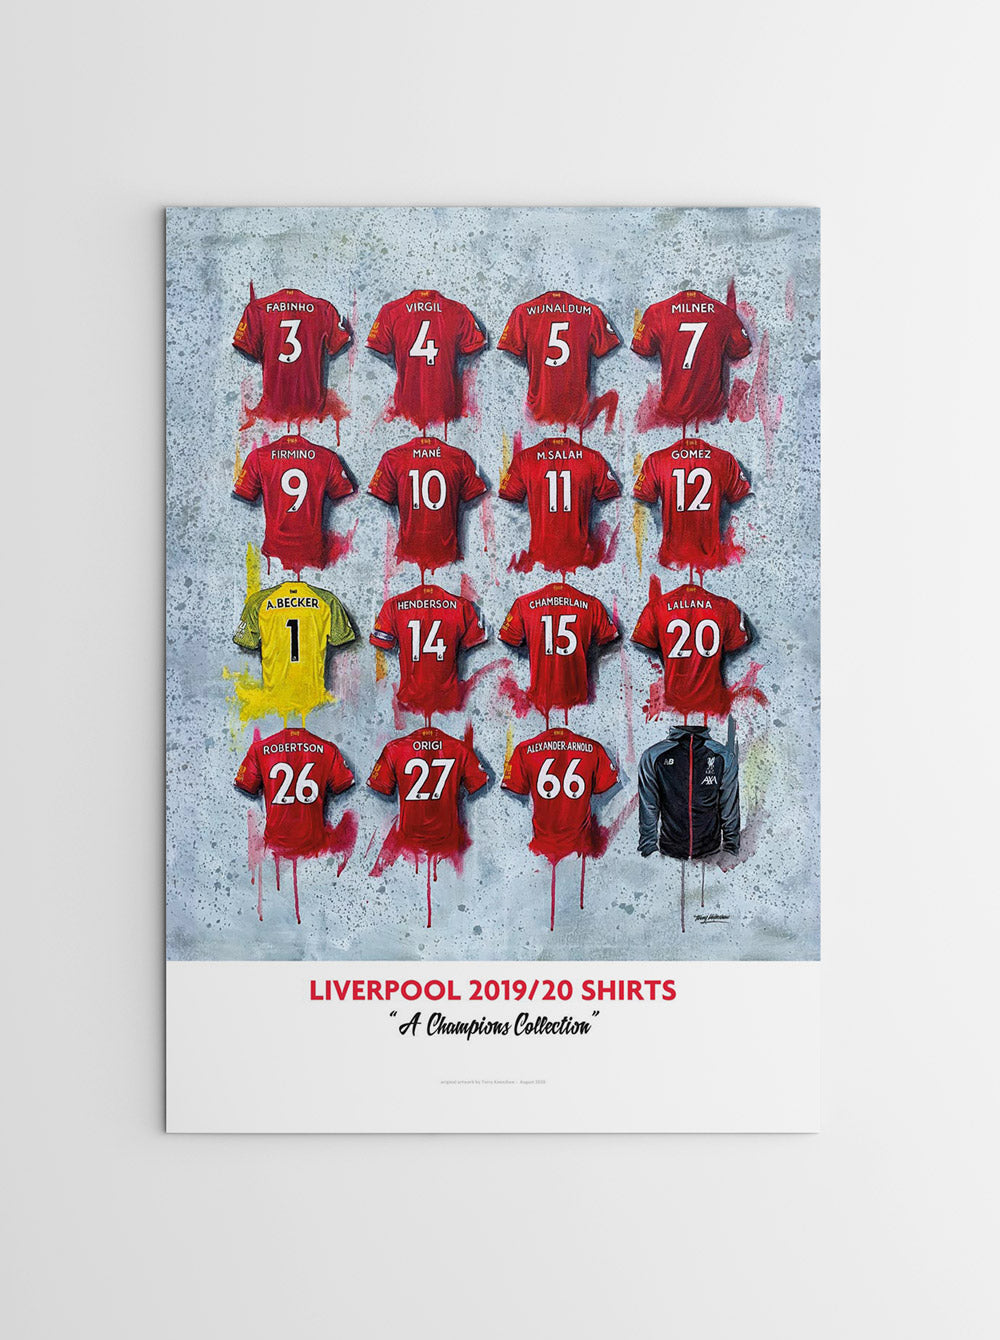 This is a personalised A2 limited edition print artwork by Terry Kneeshaw featuring 16 iconic Liverpool jerseys. The artwork showcases the team's championship winning kits from the 2020/21 season. This print celebrates the team's rich history. This unique piece can be personalised with your name and favorite number on the back of one of the jerseys.